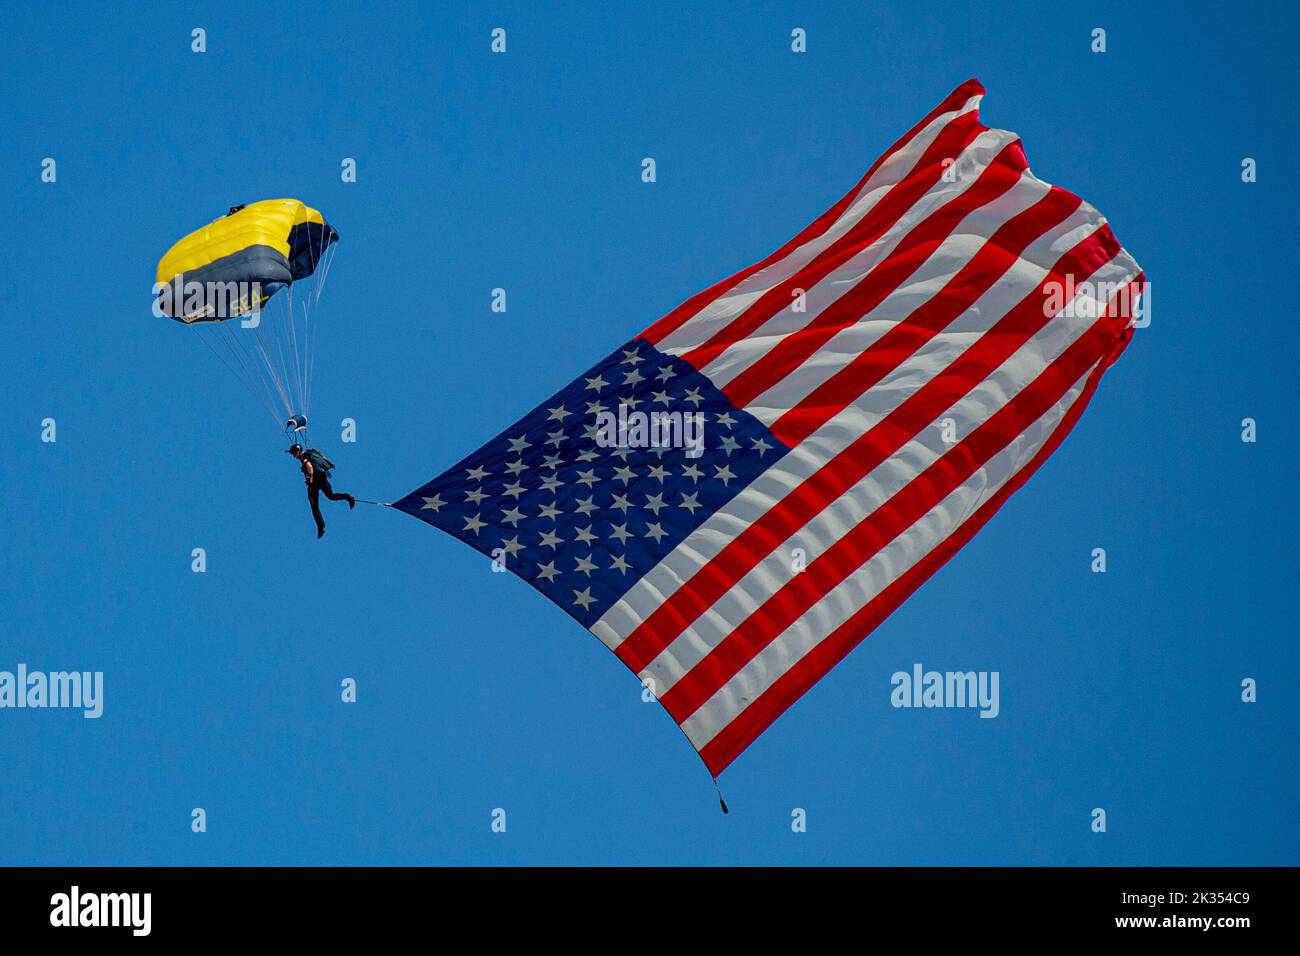 The U.S. Navy Parachute Team, nicknamed the Leap Frogs, conducts an aerial demonstration from a U.S. Army C-147A at the 2022 Marine Corps Air Station Miramar Air Show at MCAS Miramar, San Diego, California, Sept. 23, 2022. The Leap Frogs Navy Parachute Team is made up of active-duty Navy SEALs, Special Warfare Combatant-craft Crewmen and support personnel. The theme for the 2022 MCAS Miramar Air Show, “Marines Fight, Evolve and Win,” reflects the Marine Corps’ ongoing modernization efforts to prepare for future conflicts. (U.S. Marine Corps photo by Lance Cpl. Zachary Larsen) Stock Photo